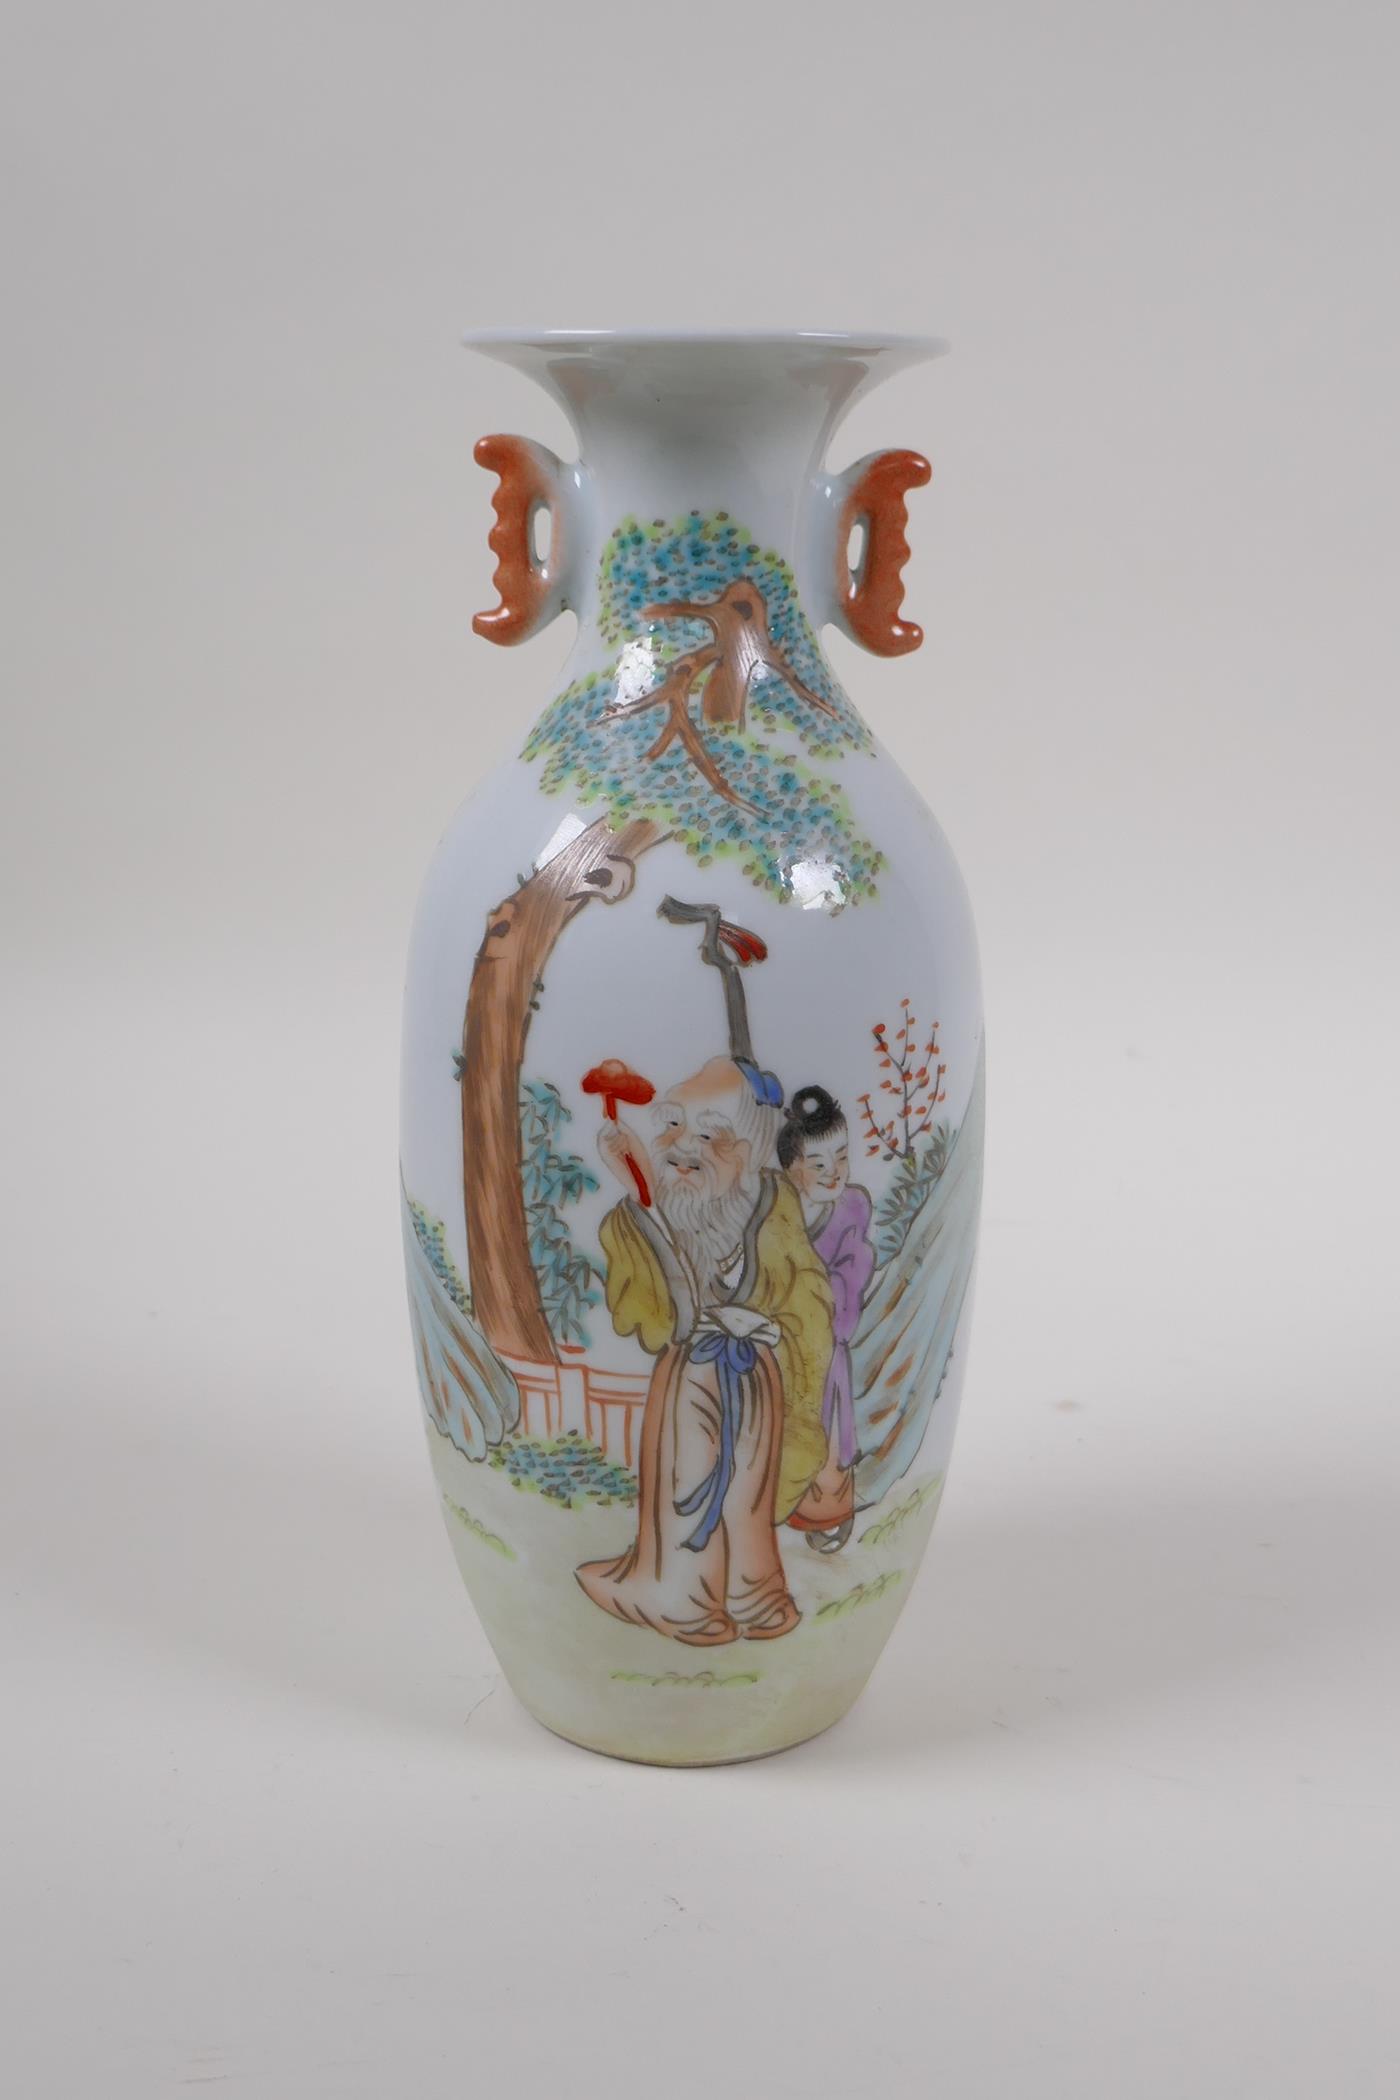 An early C20th Chinese polychrome porcelain vase with two handles, decorated with Lohan, inscription